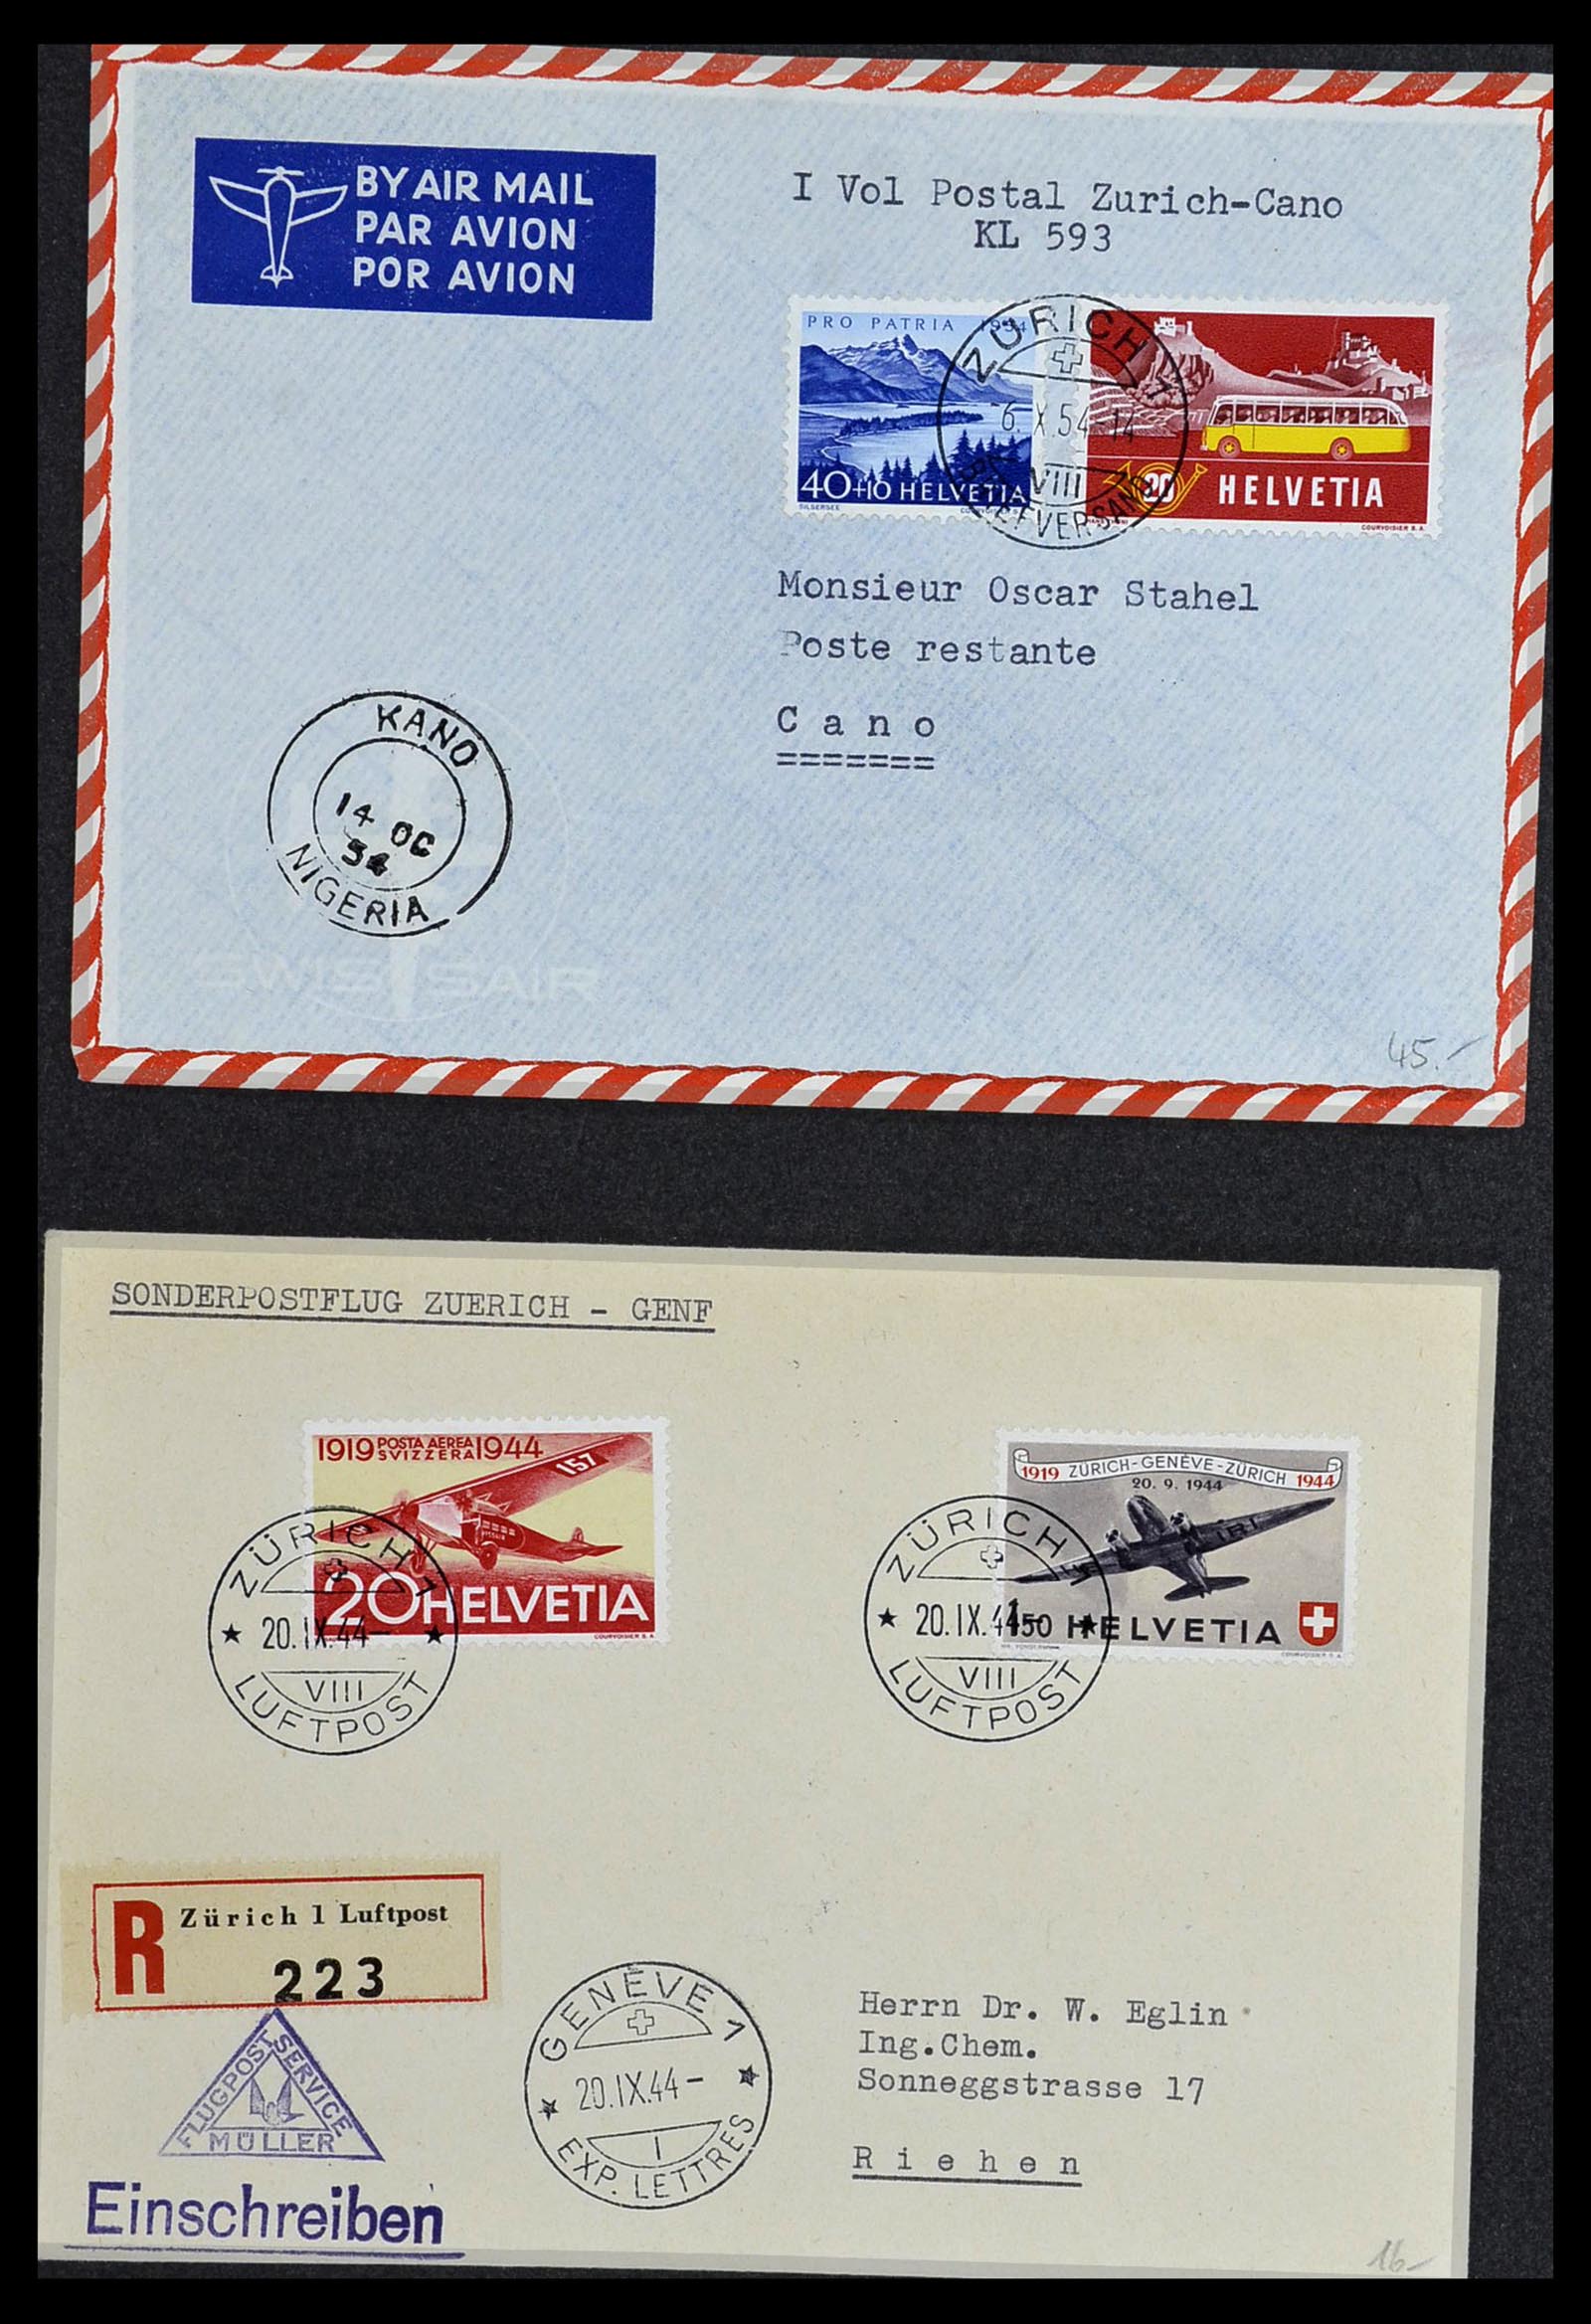 34141 070 - Stamp collection 34141 Switzerland airmail covers 1920-1960.